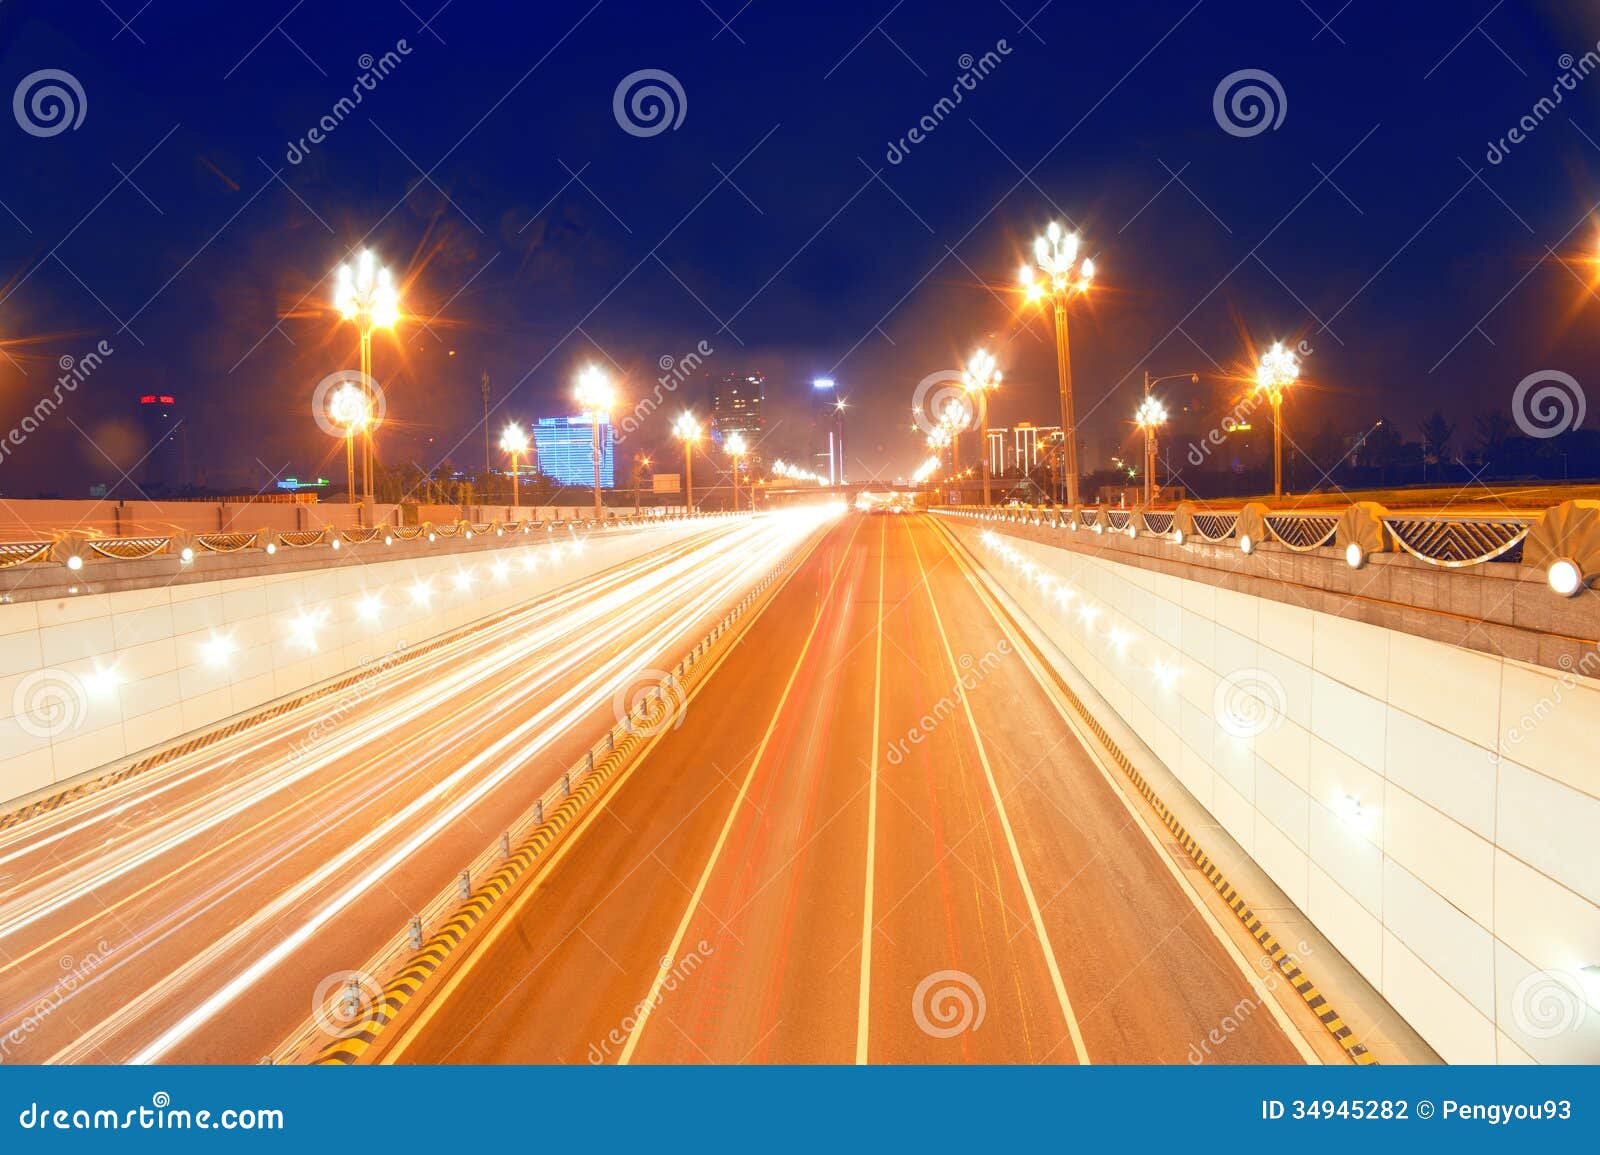 cars on the roads at night